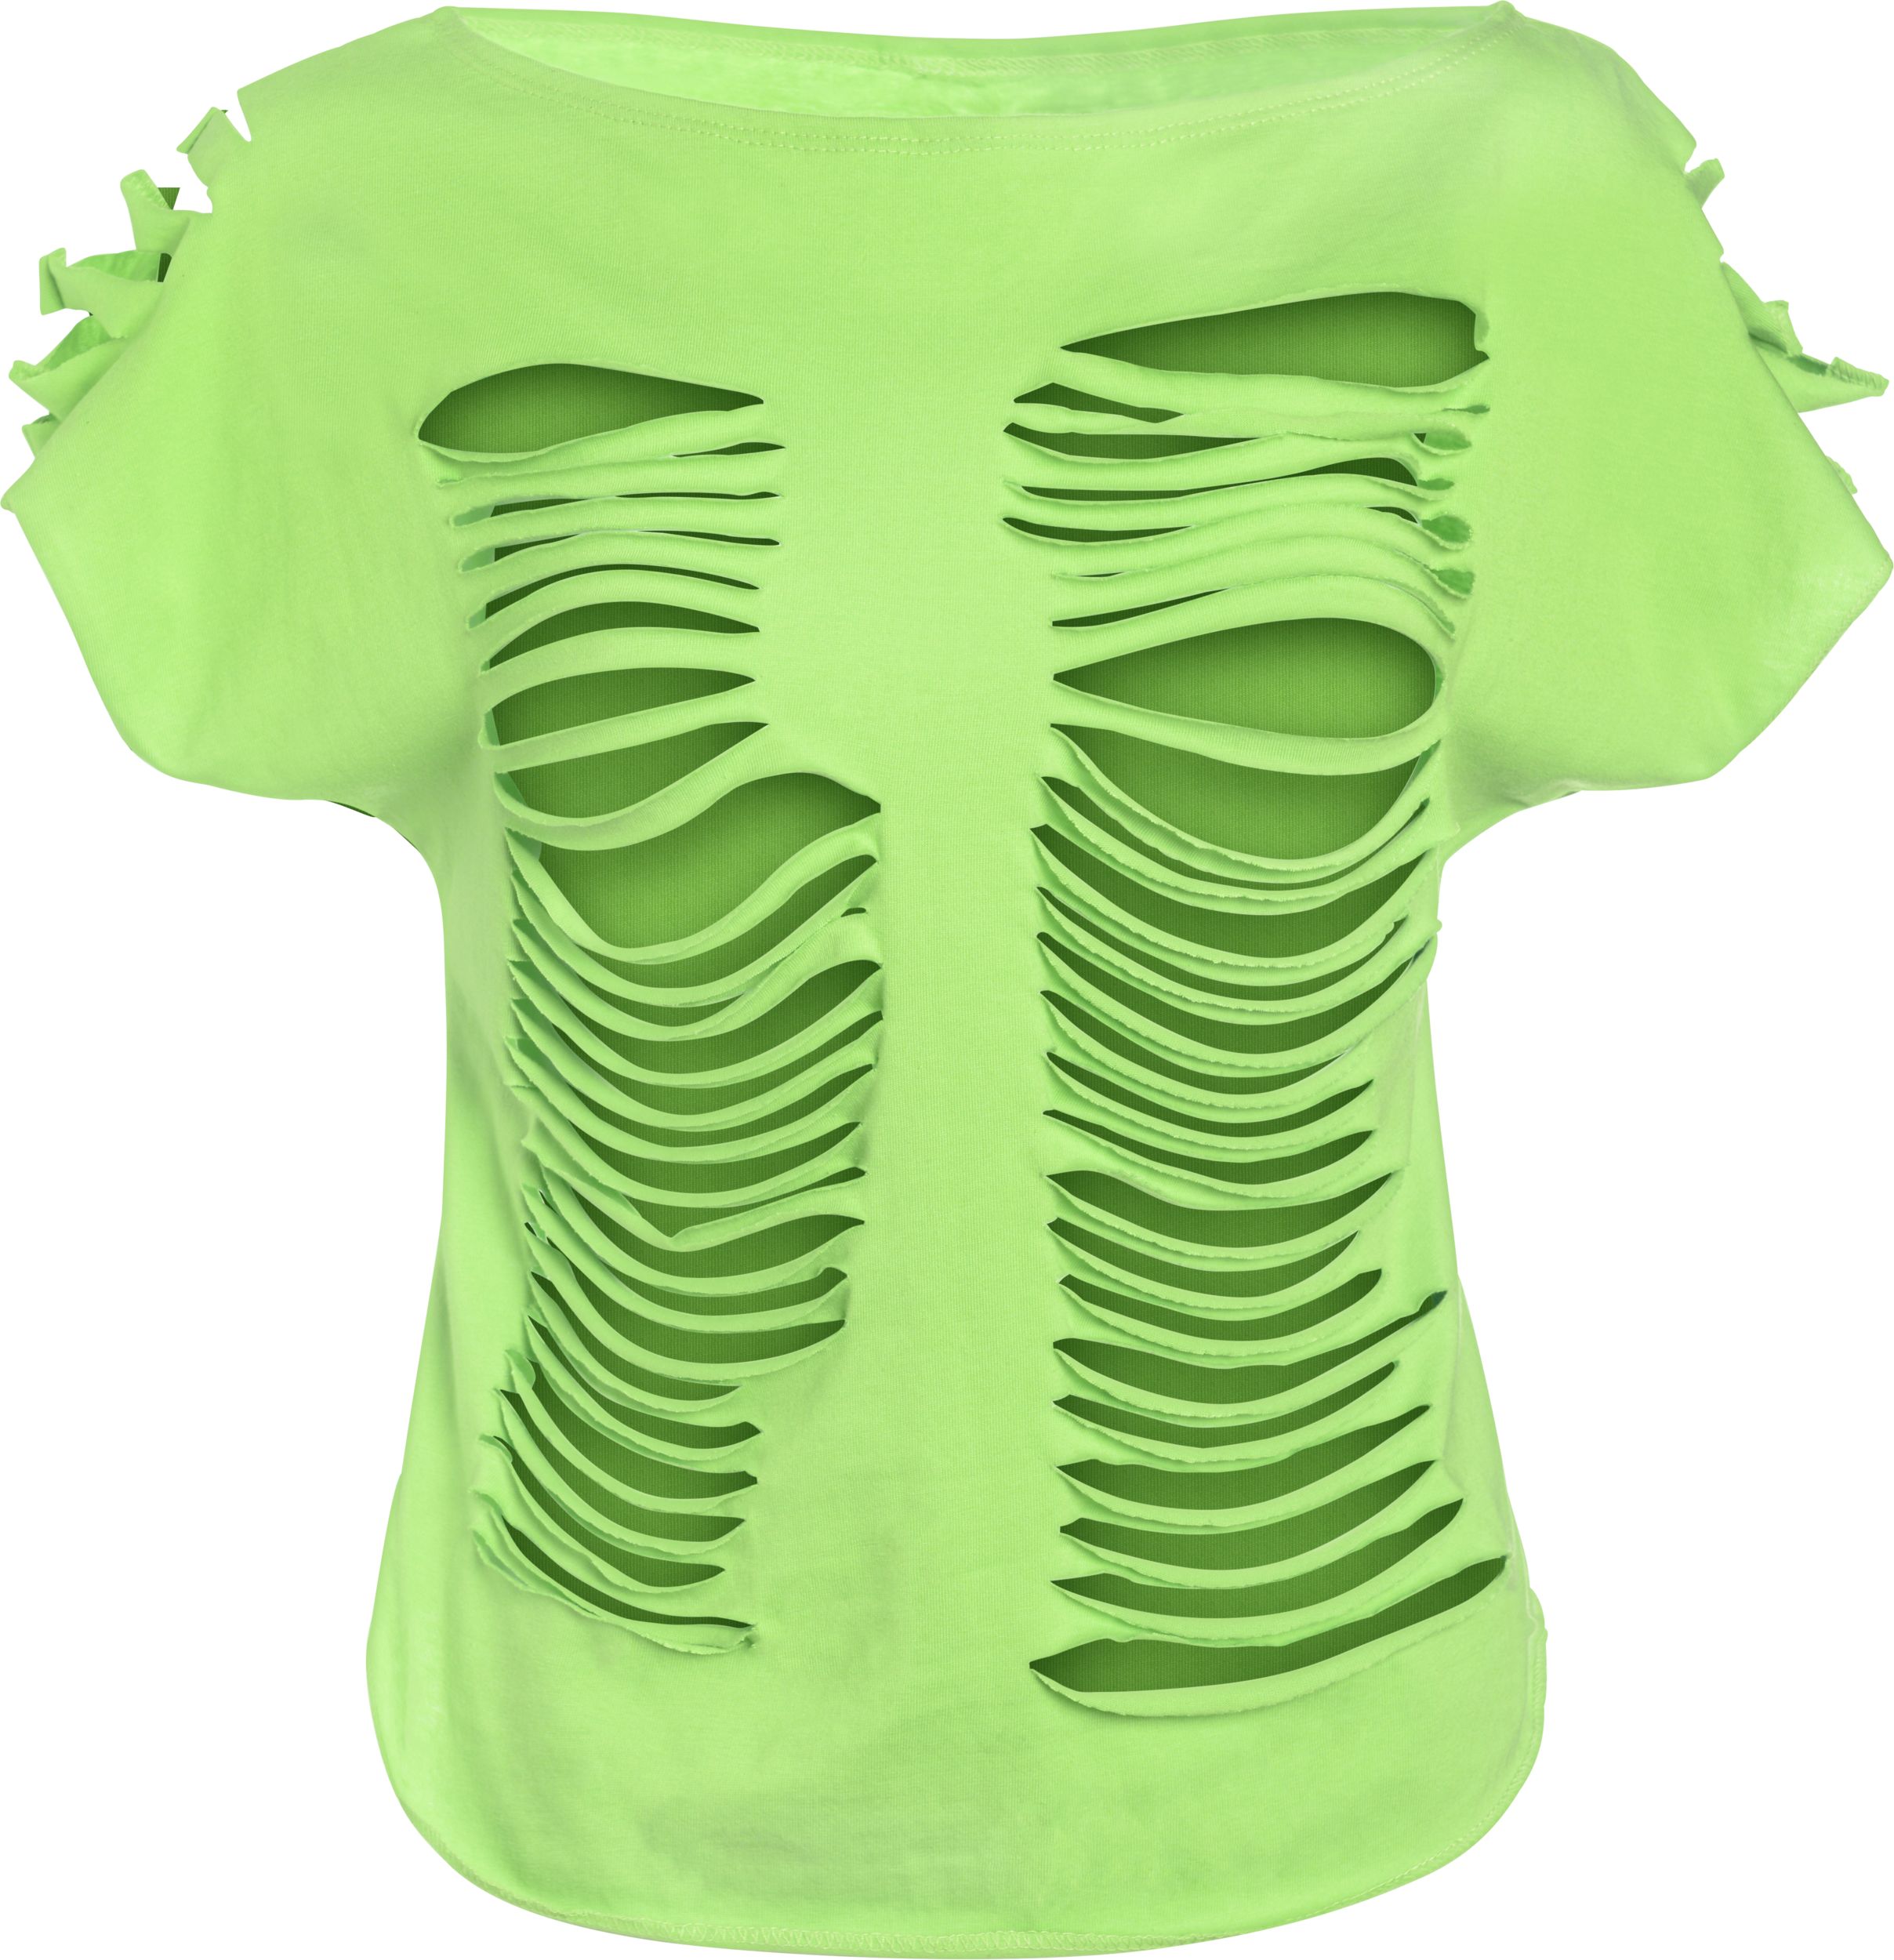 https://media-www.partycity.ca/product/seasonal-gardening/party-city-seasonal/party-city-halloween-and-fall-decor/8518564/neon-green-ripped-t-shirt-e329a340-a07c-4e6b-afd9-2582dfed4658-jpgrendition.jpg